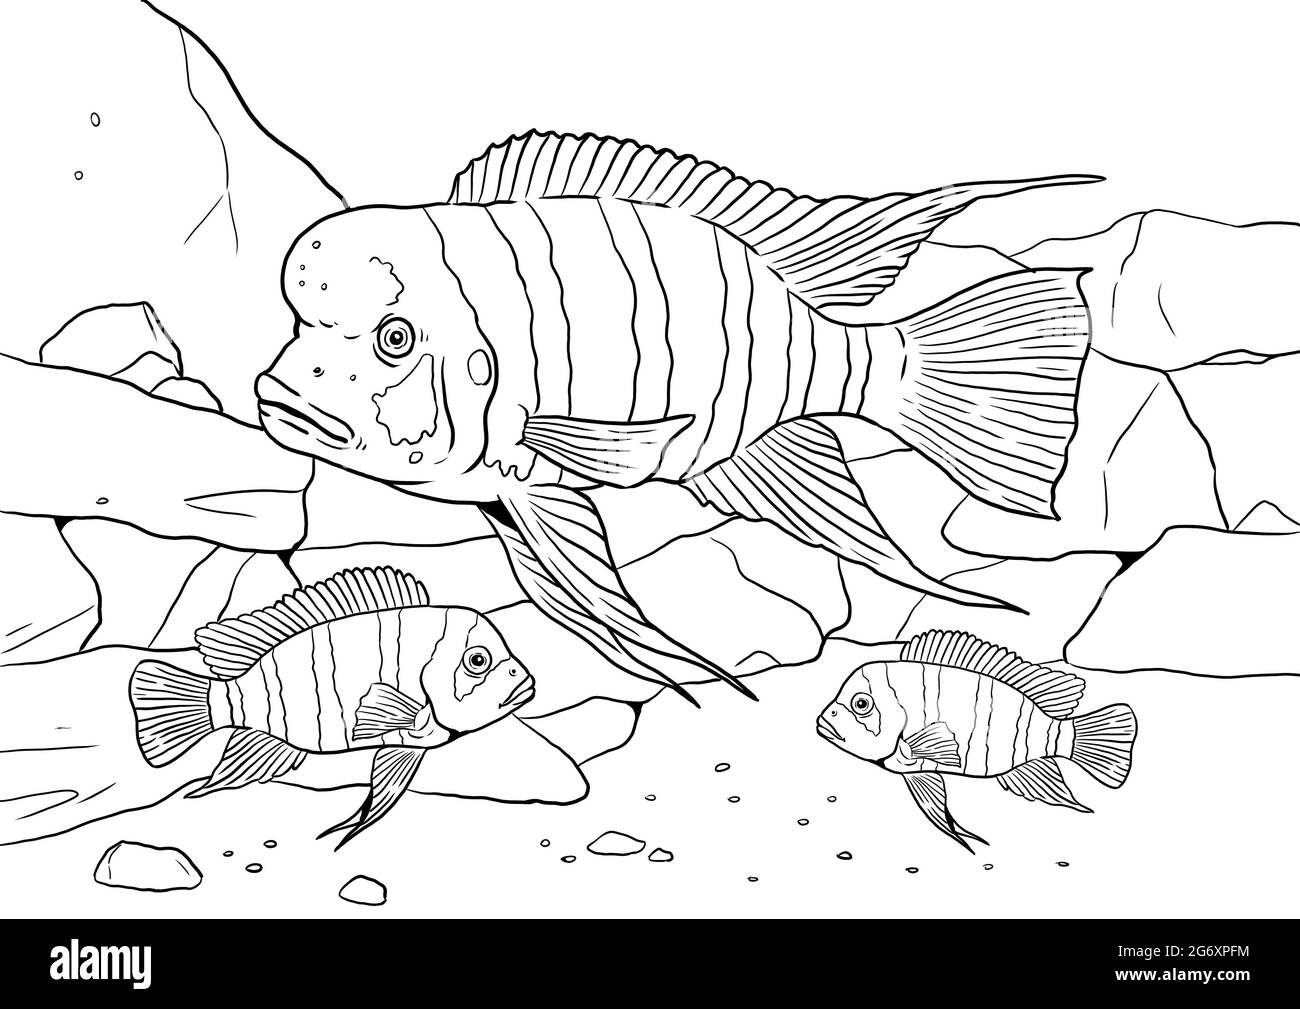 Aquarium with Cyphotilapia frontosa for coloring. Colorful african fish templates. Coloring book for children and adults. Stock Photo